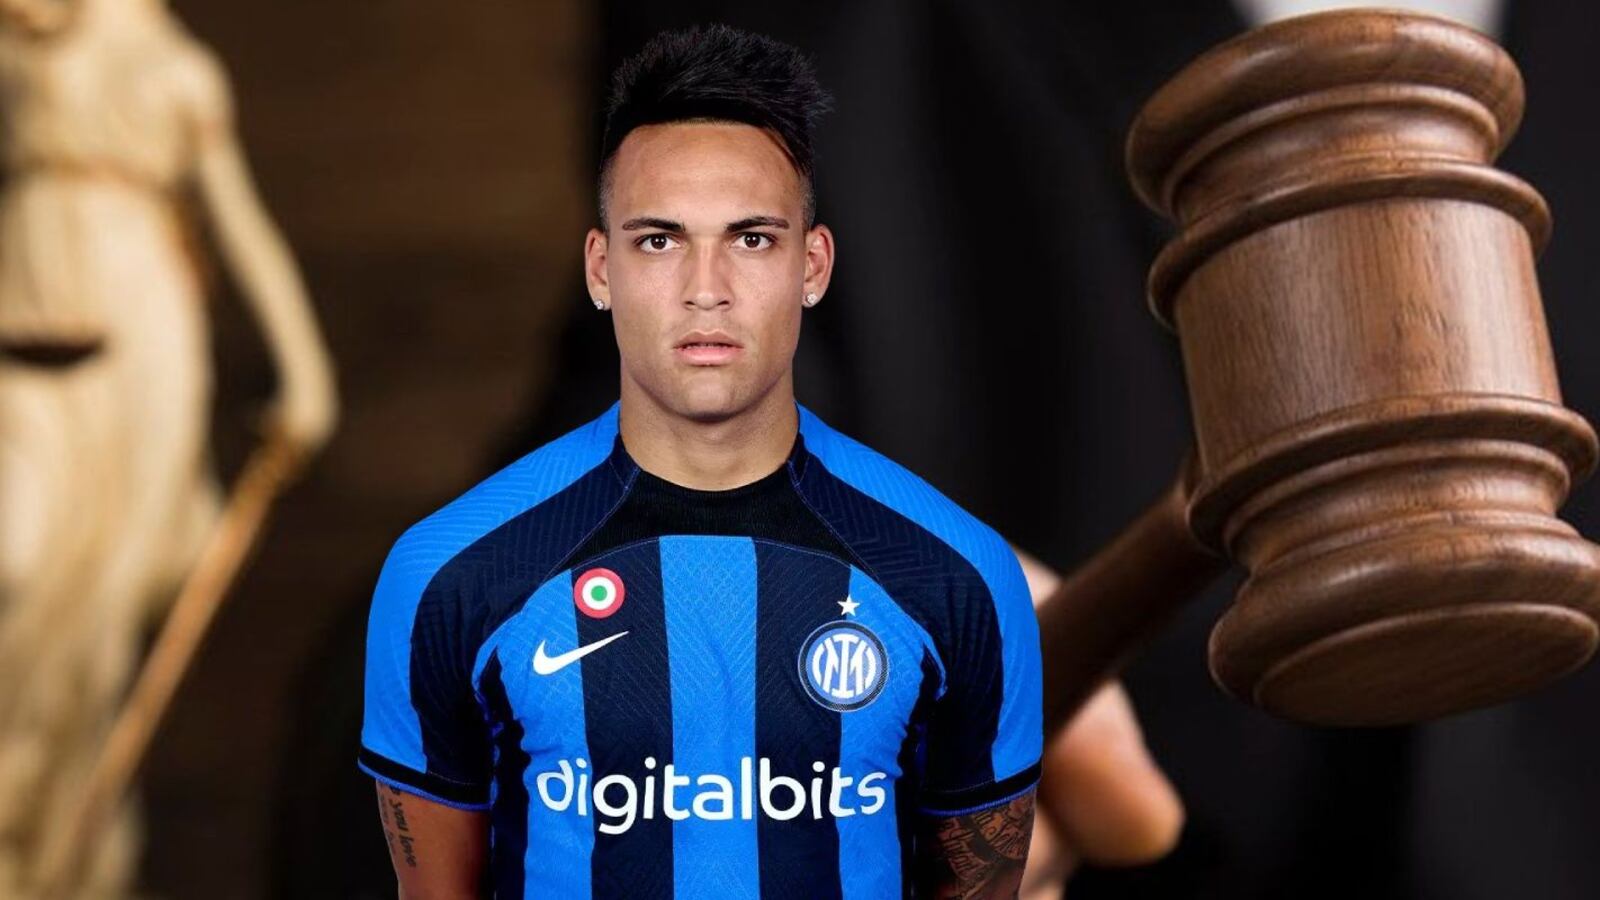 Lautaro Martínez was sued in Italy and looks at the court's decision